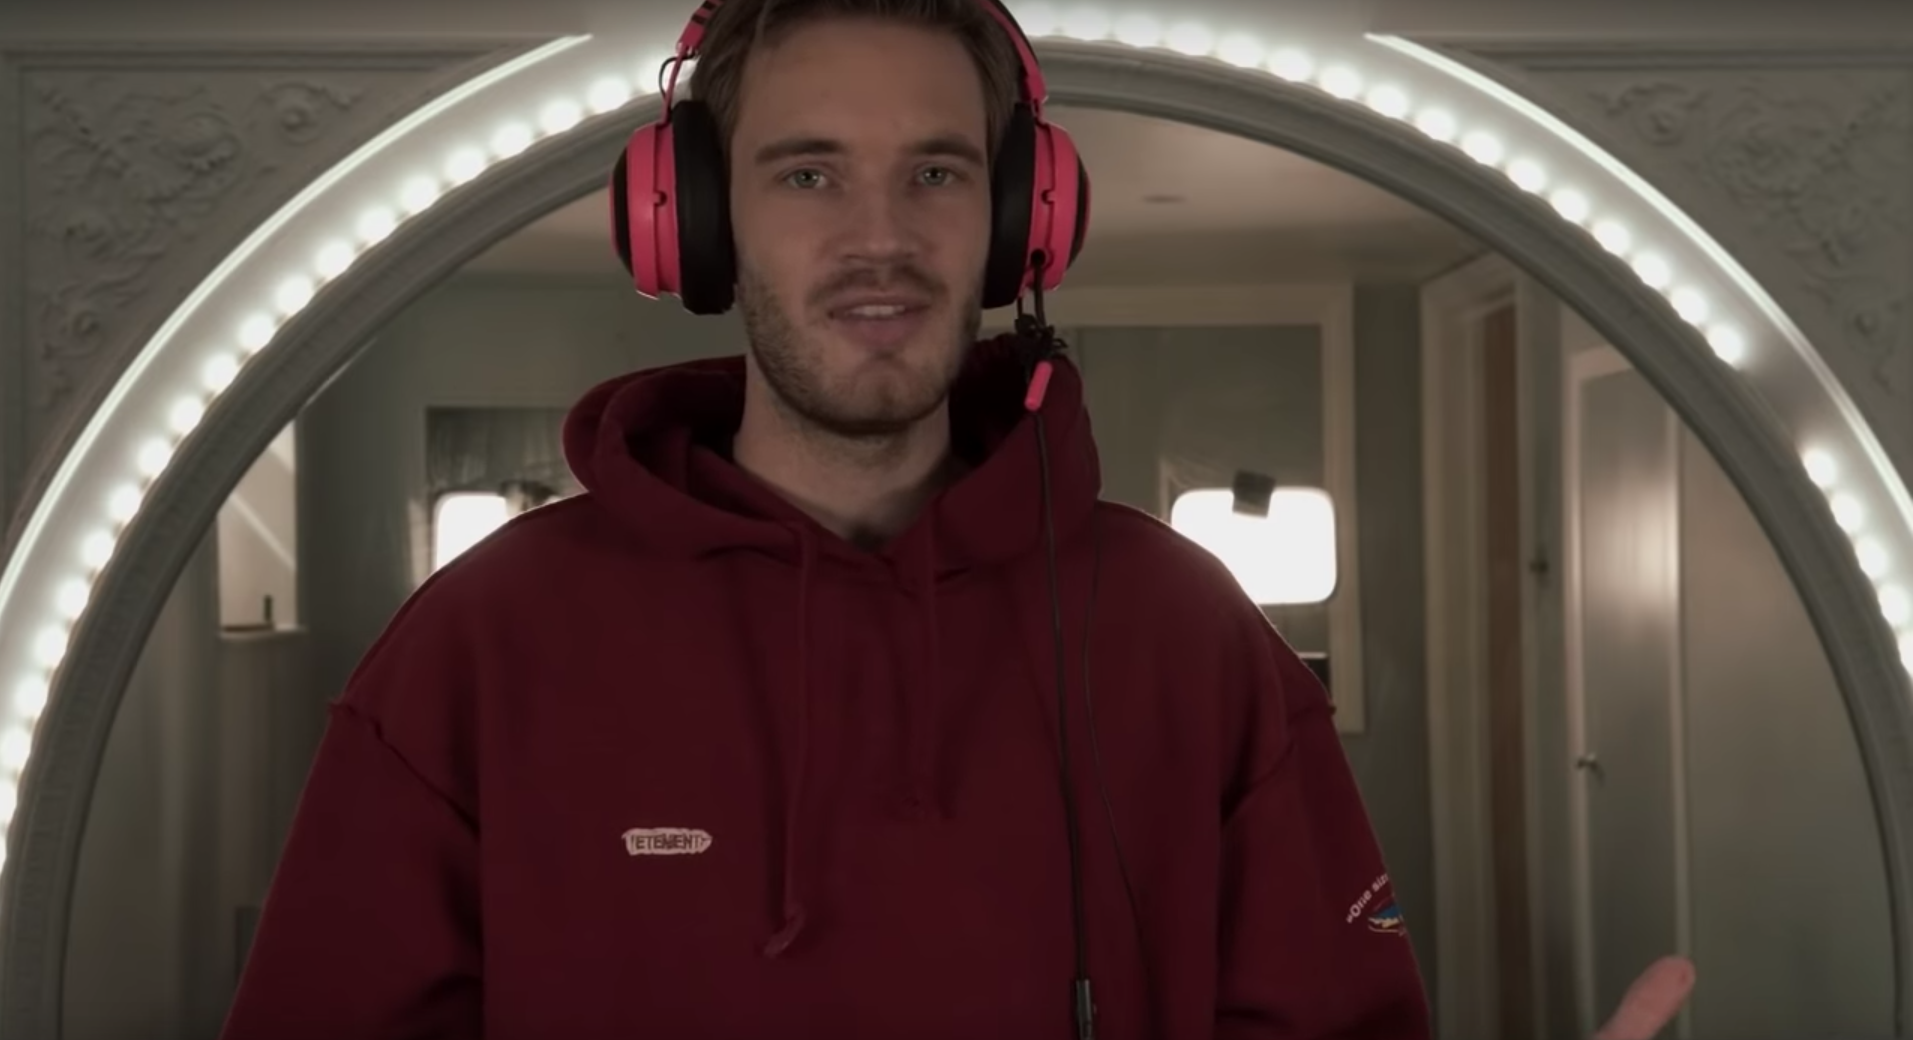 PewDiePie Has To Explain That His $50,000 Pledge To An Anti-Hate Group Is Legit